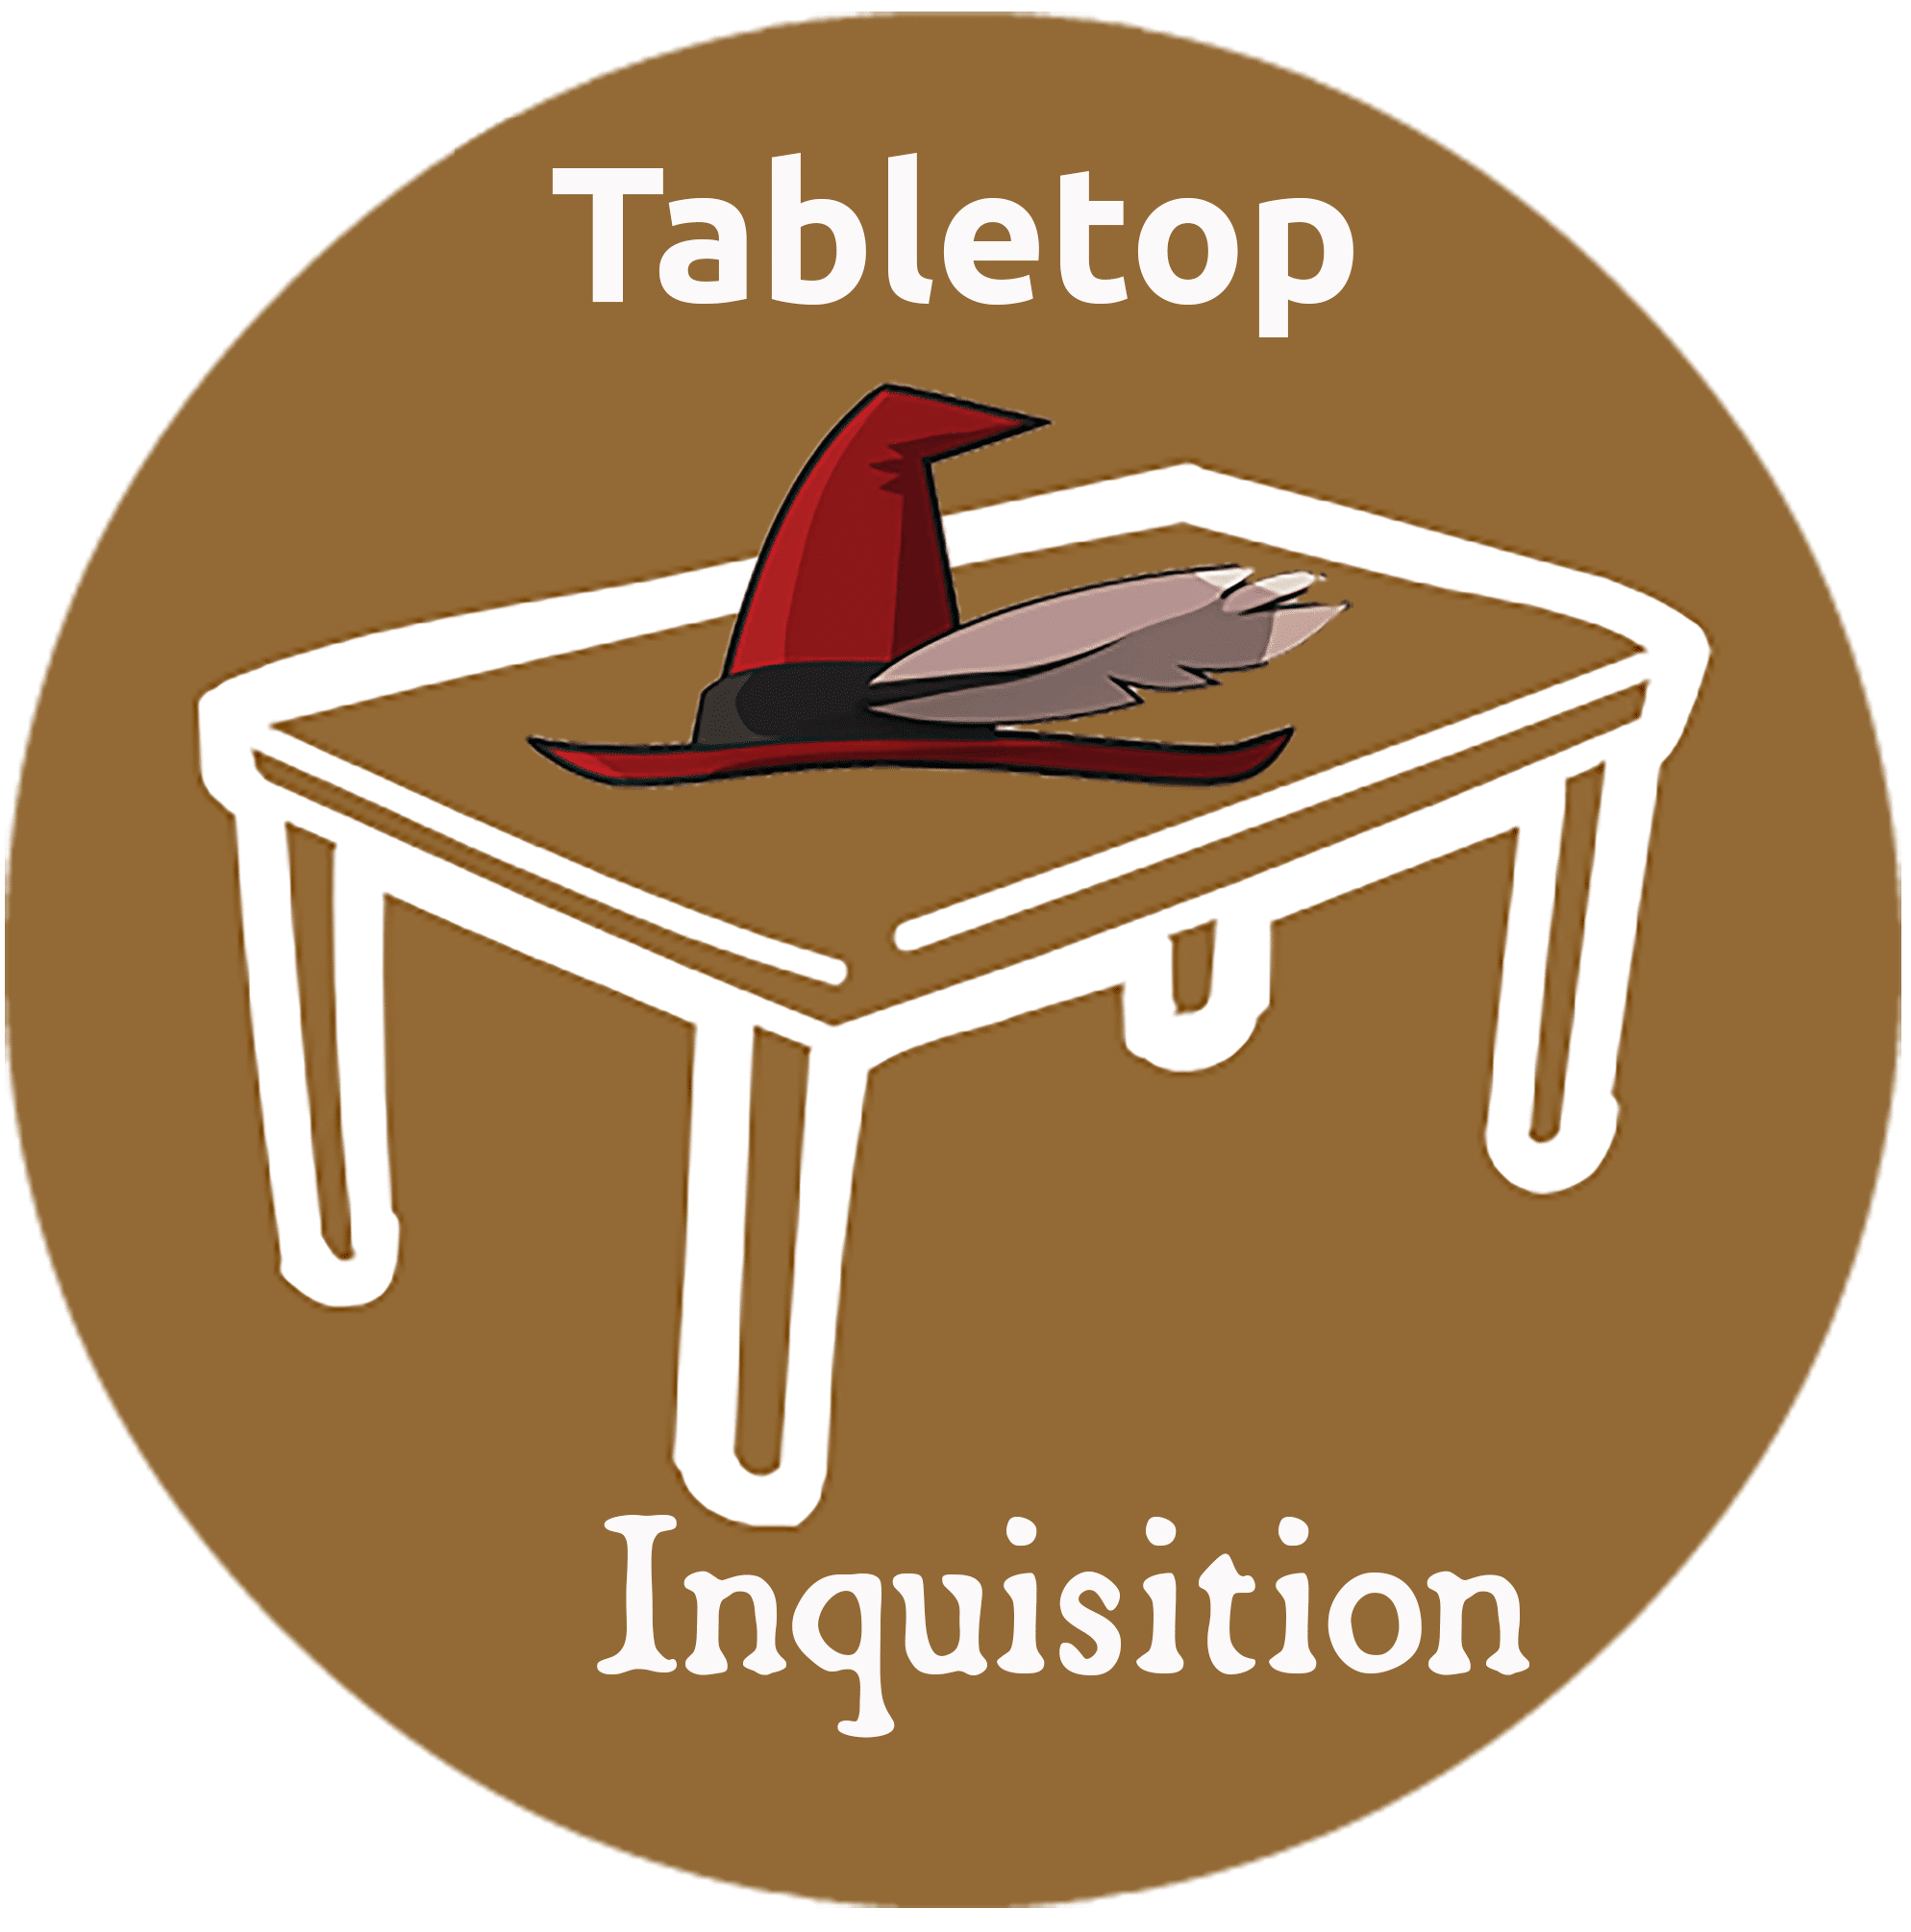 Announcing Tabletop Inquisition Podcast